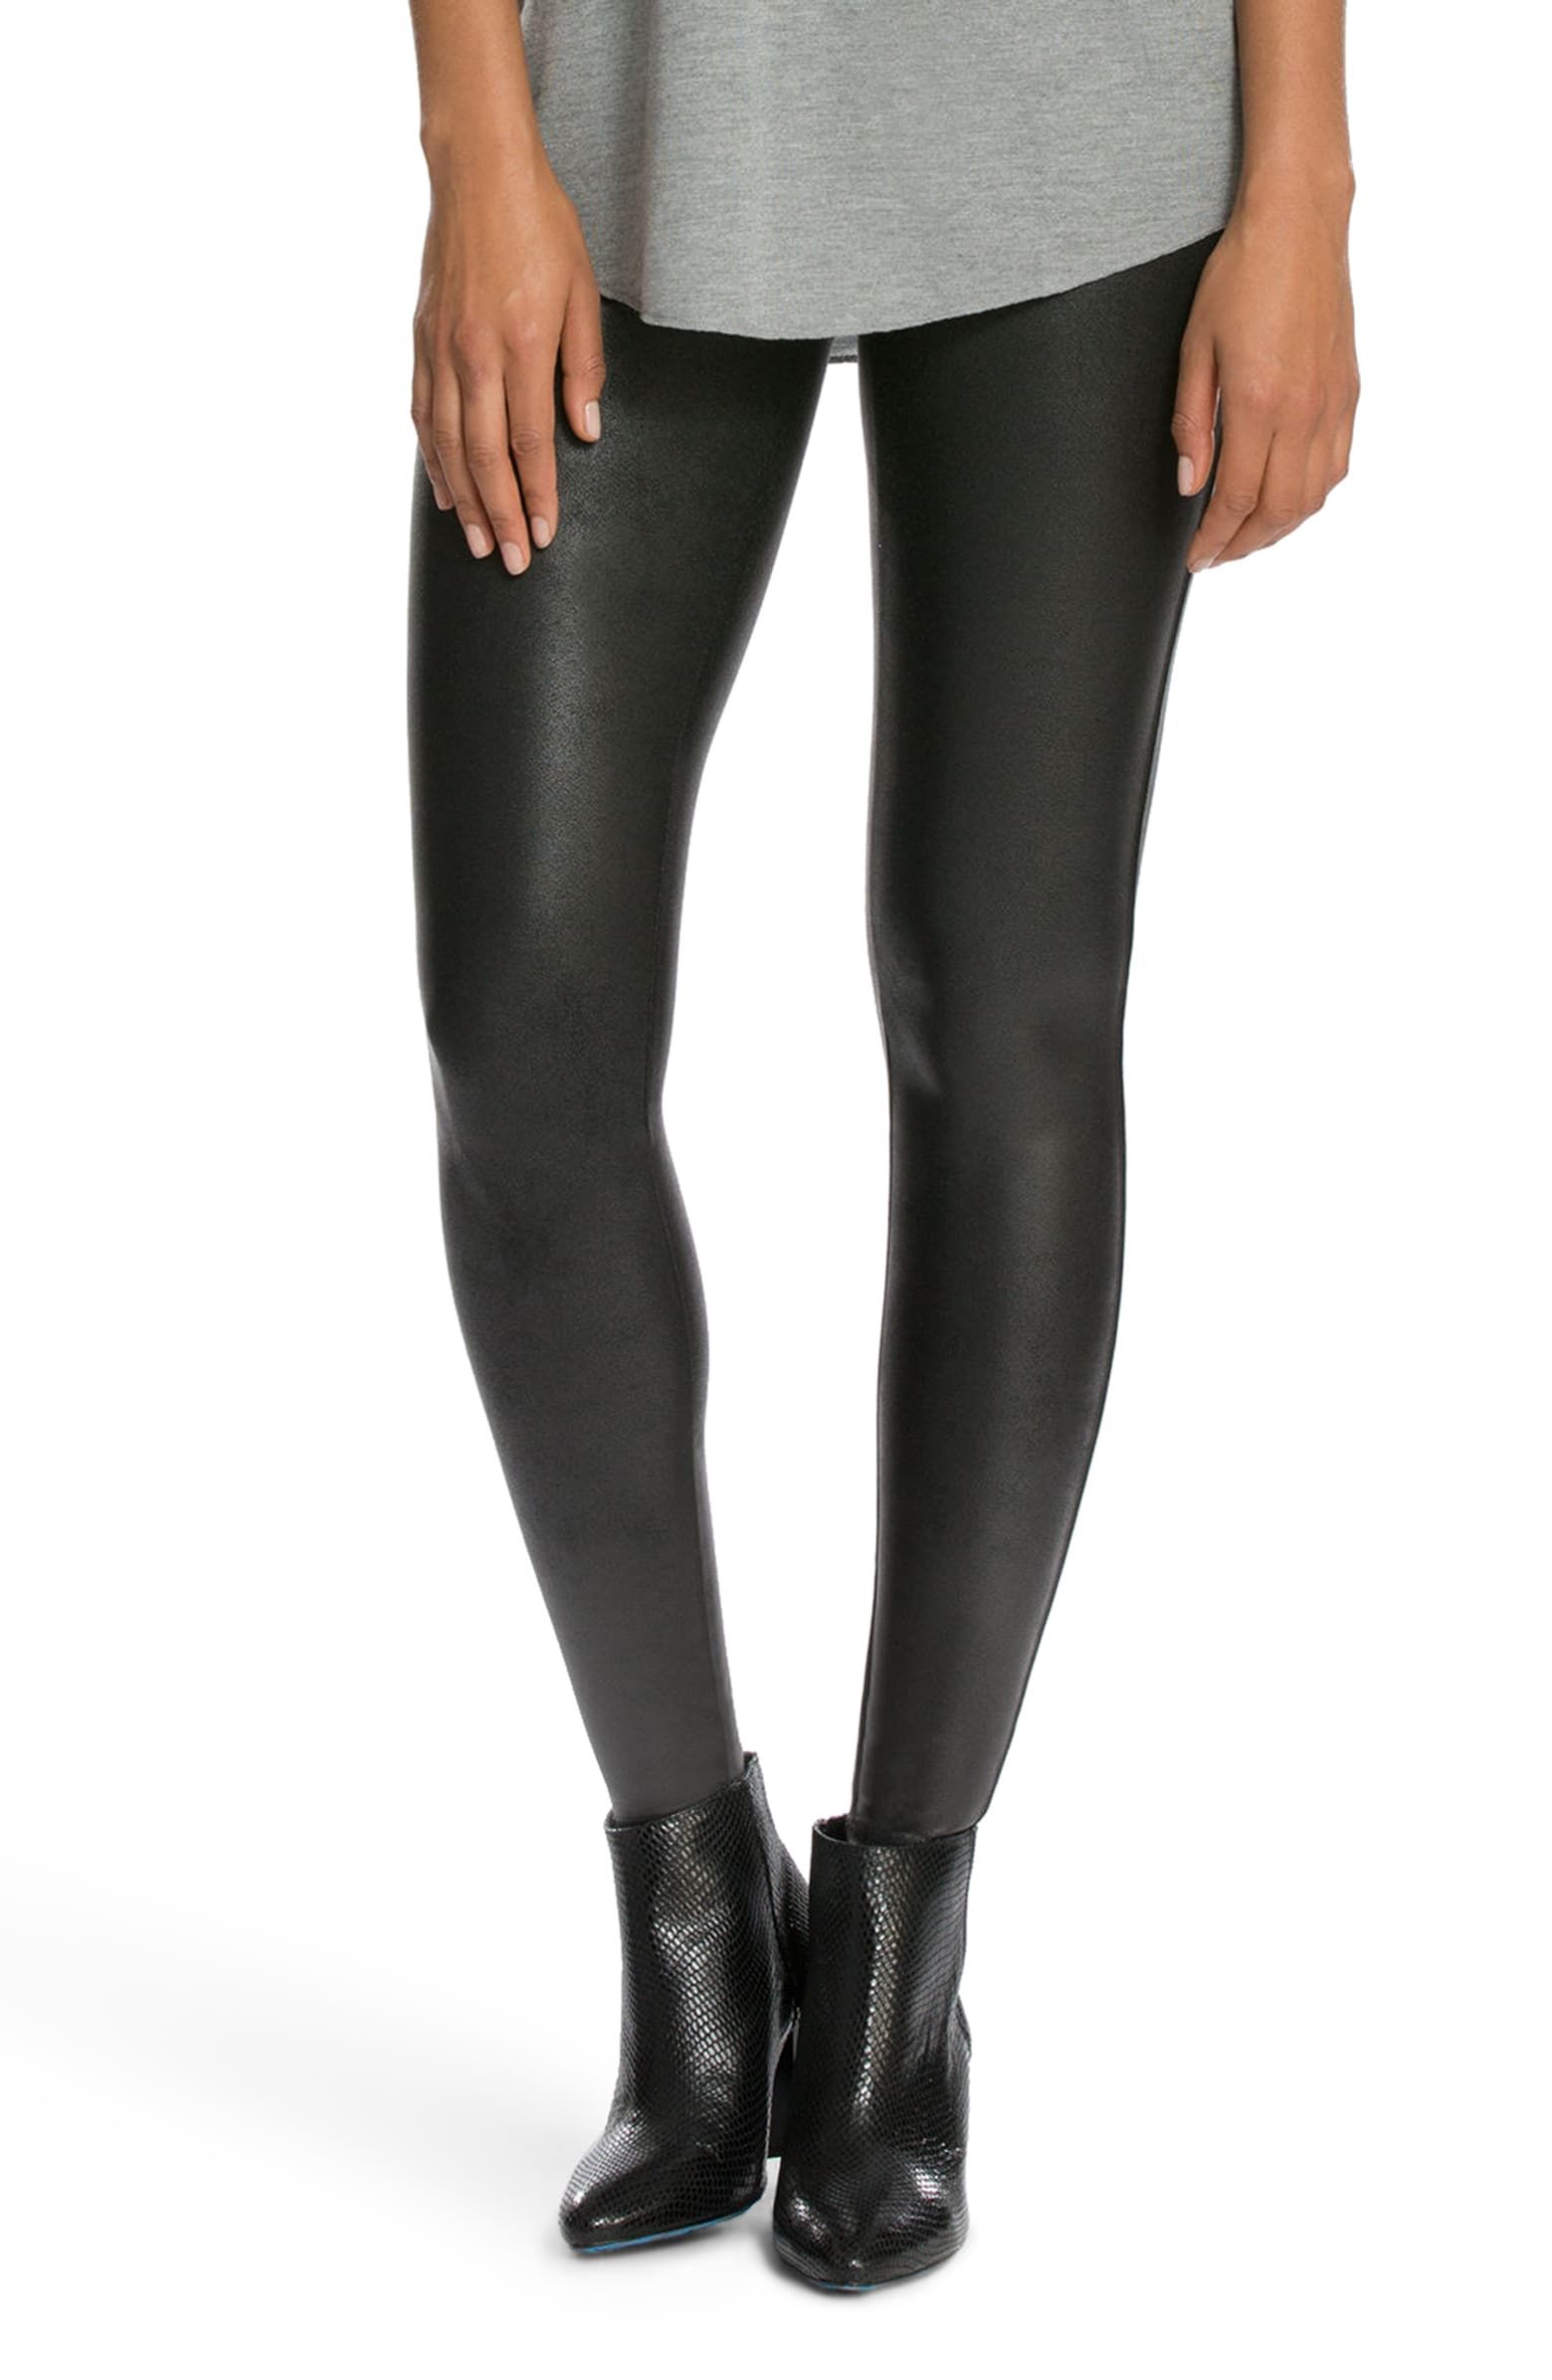 Spanx Faux Leather Leggings In Stock At UK Tights